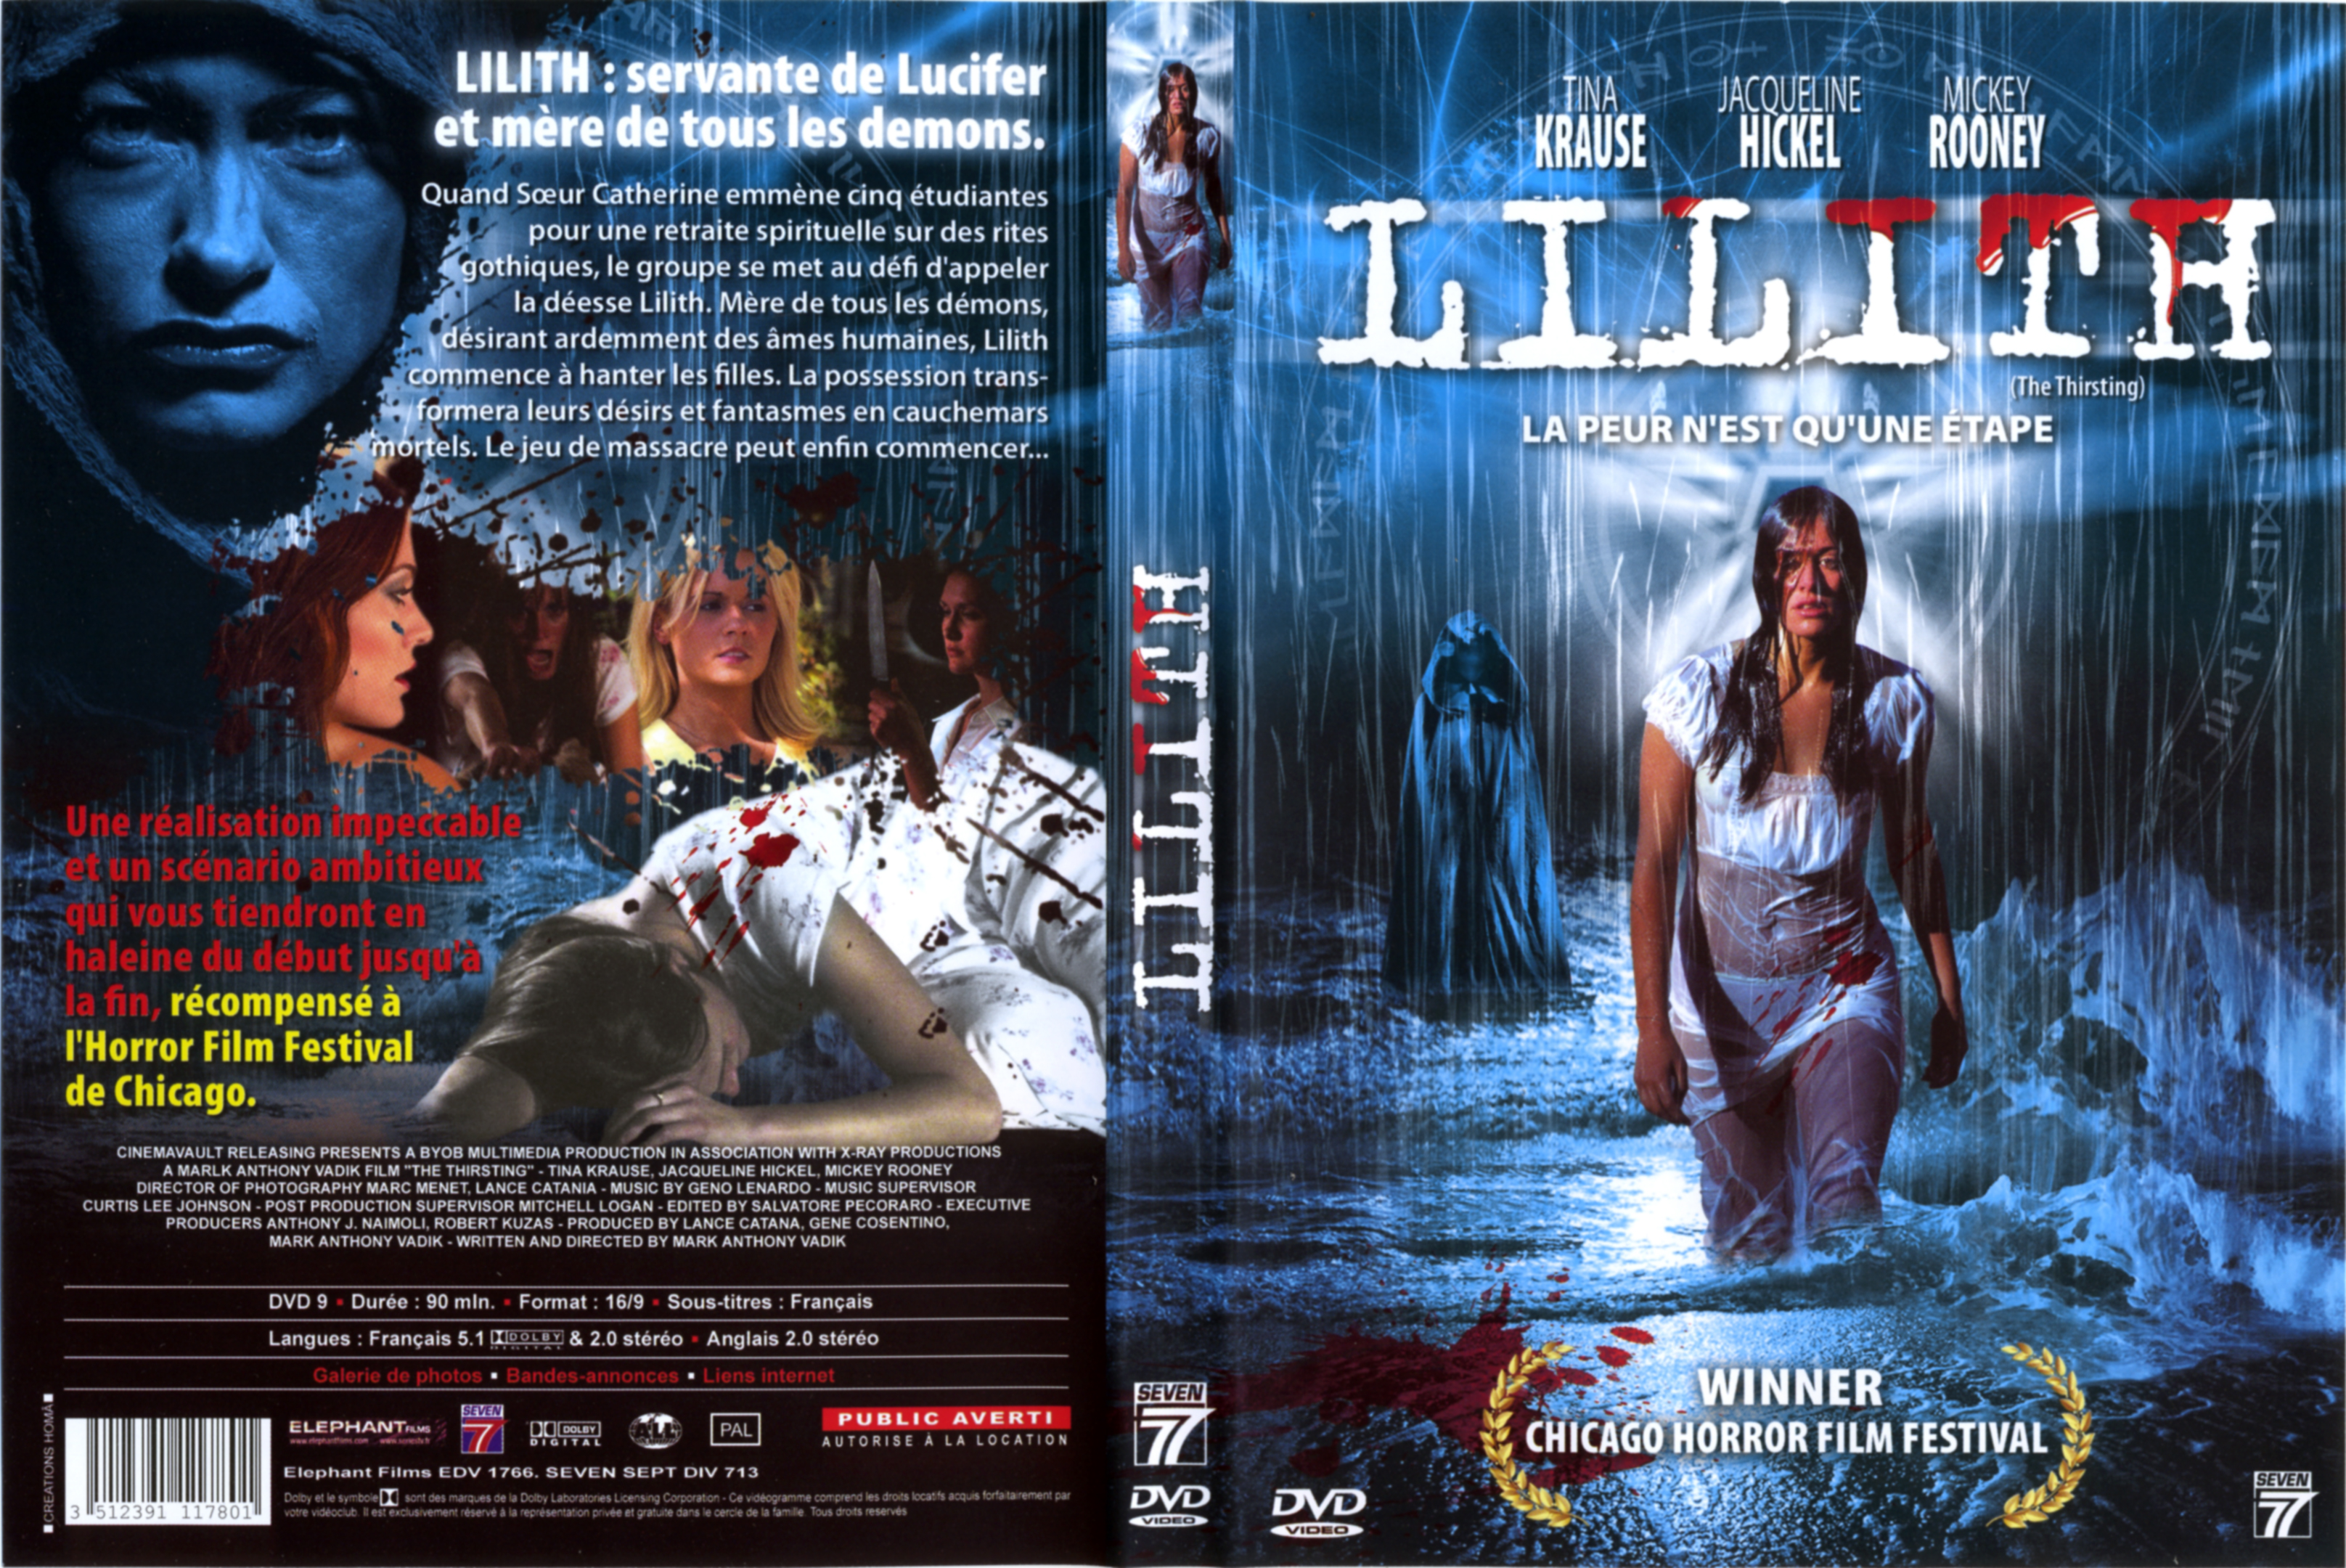 Jaquette DVD Lilith